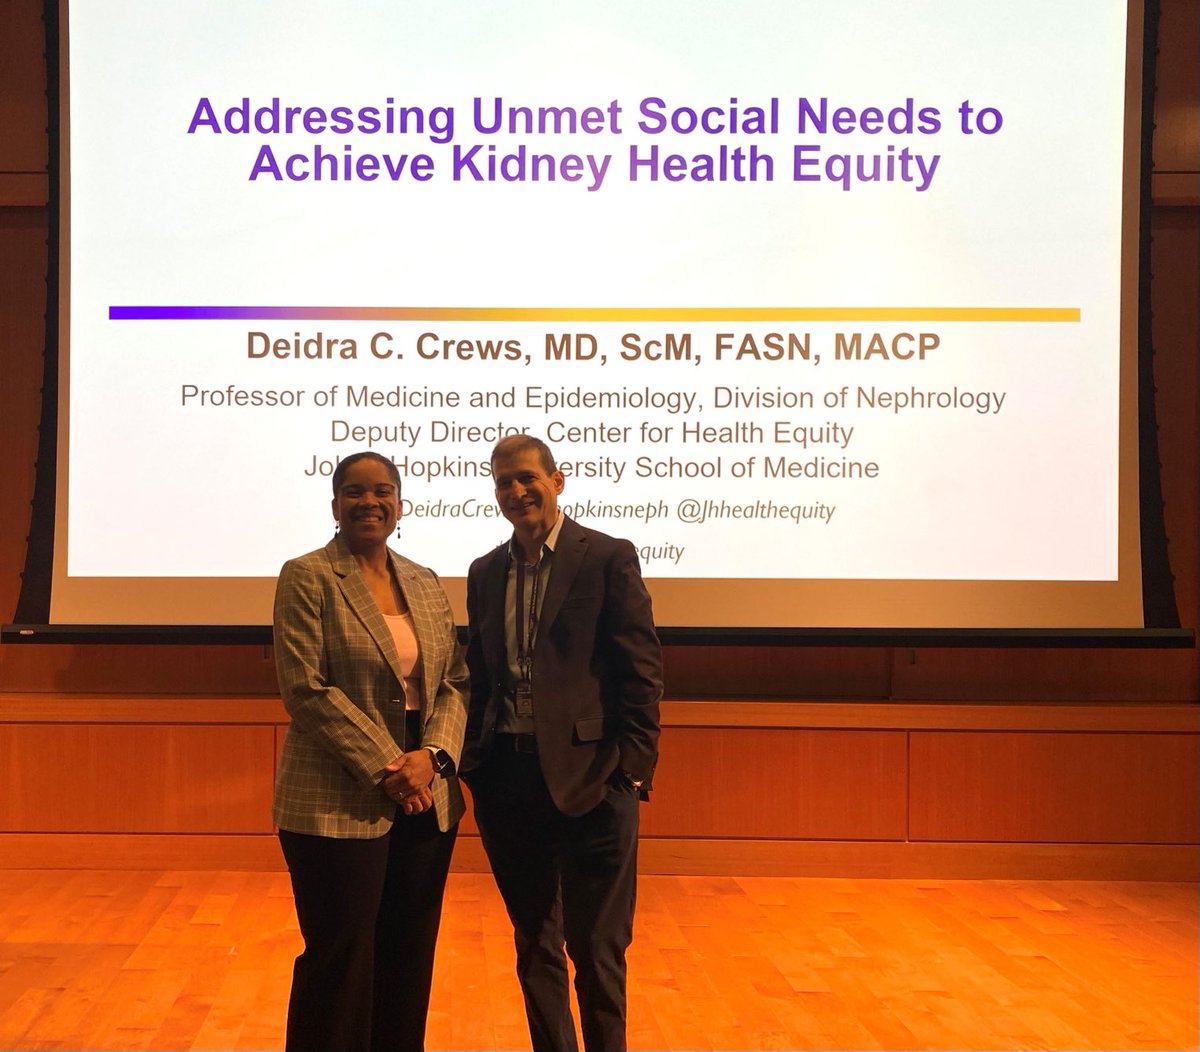 Amazing work addressing effects of housing and food insecurity on CKD and related outcomes presented by ⁦@DrDeidraCrews at grand rounds this AM-terrific talk. ⁦@NYUnephro⁩ ⁦@NYULH_DeptofMed⁩